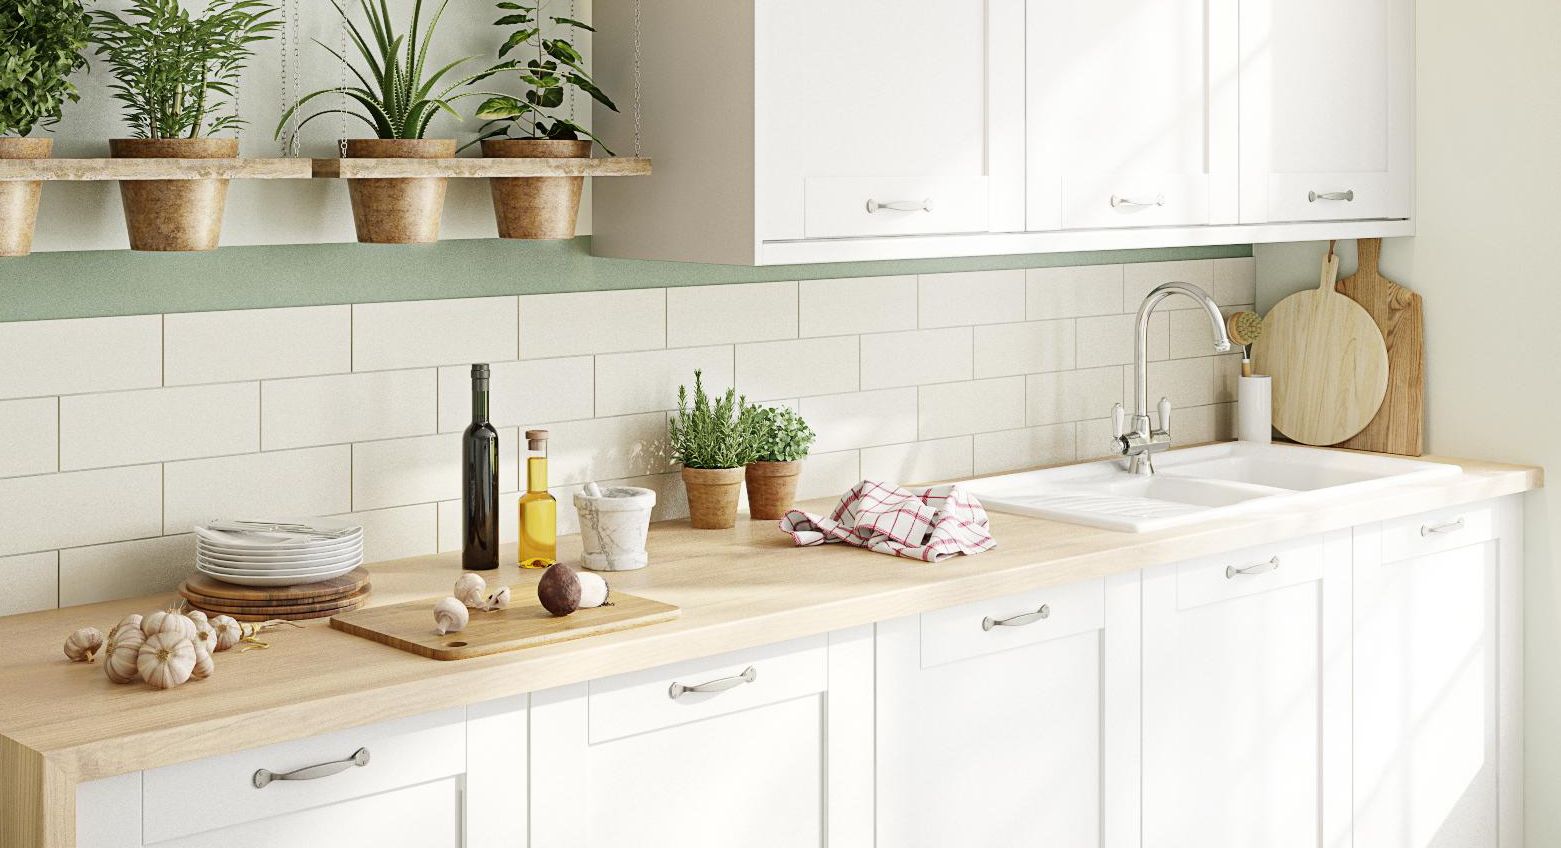 Kitchen cabinet doors buying guide | Ideas & Advice | DIY at B&Q